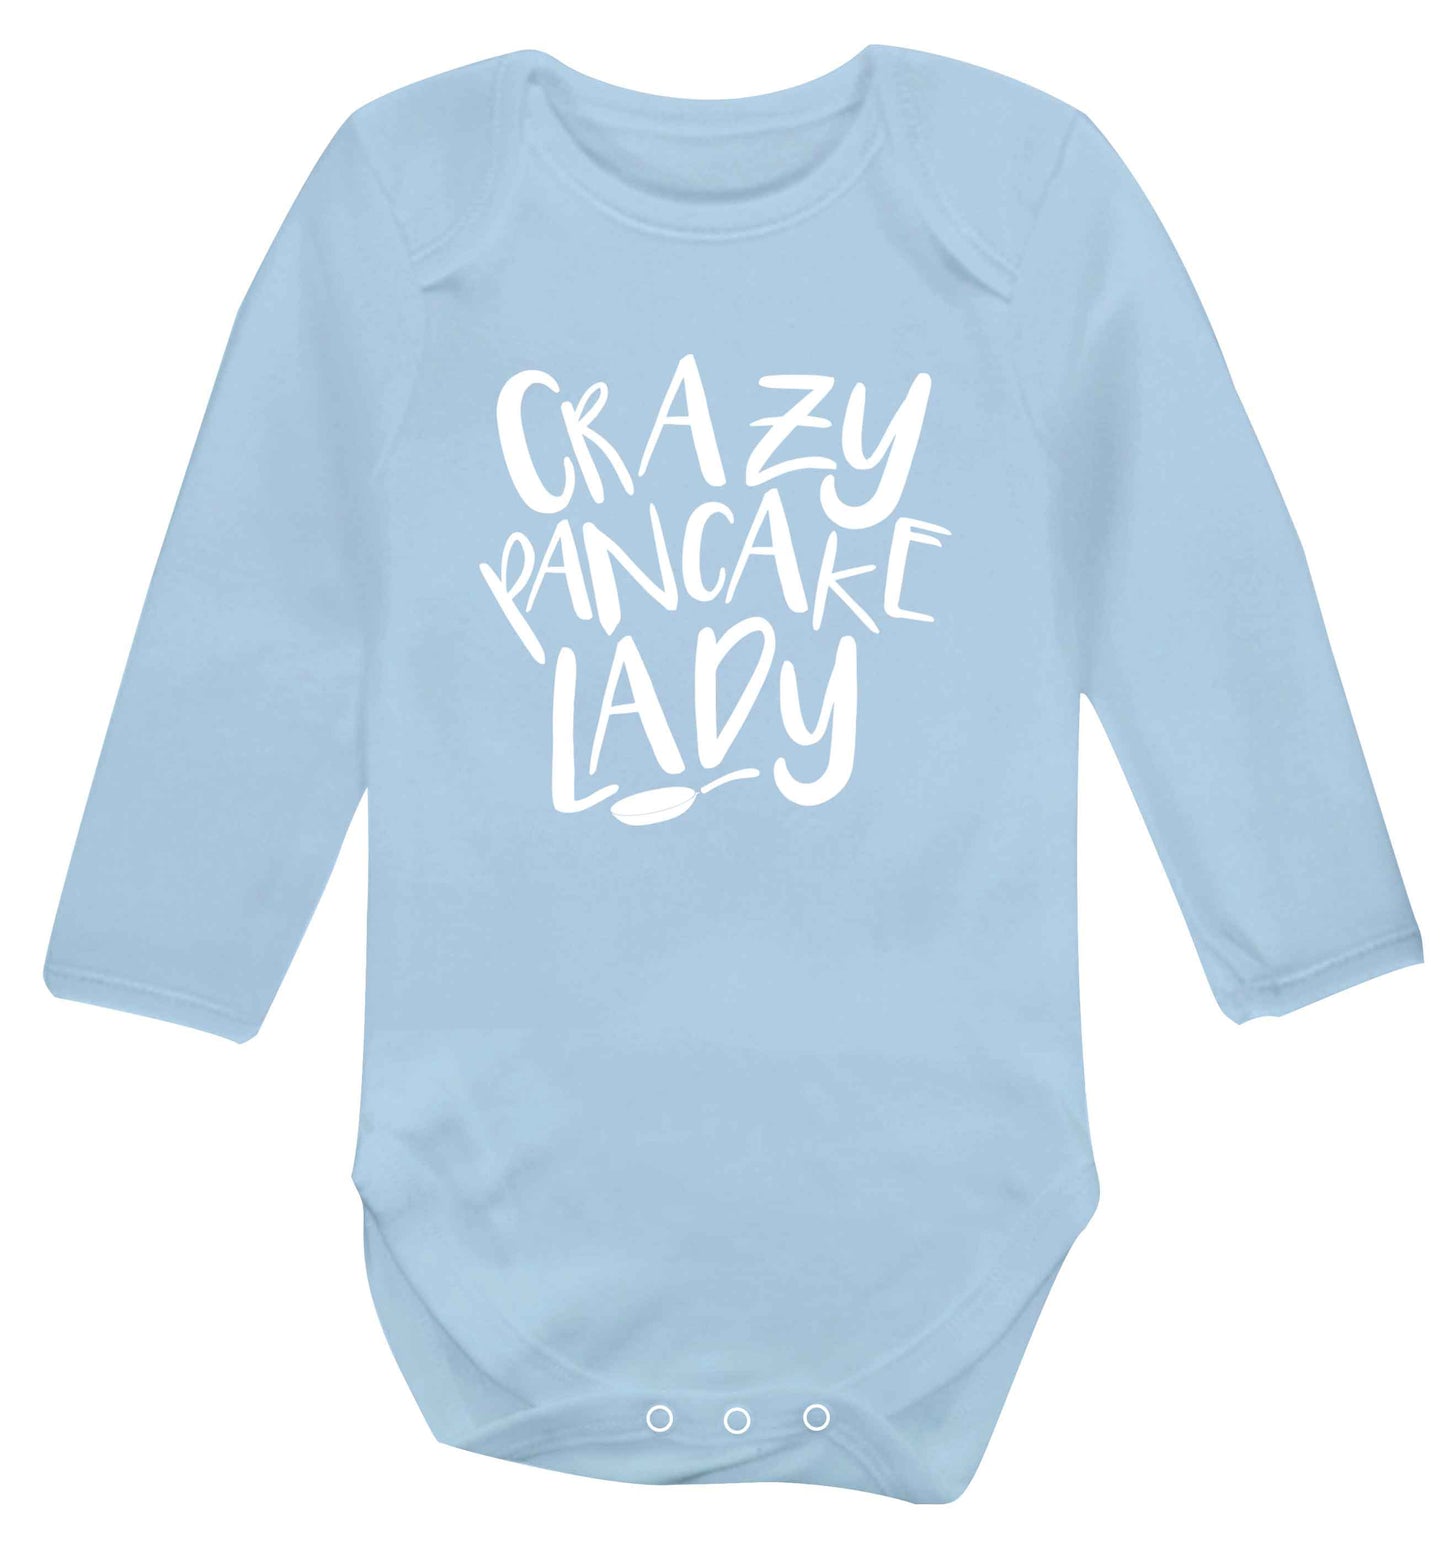 Crazy pancake lady baby vest long sleeved pale blue 6-12 months